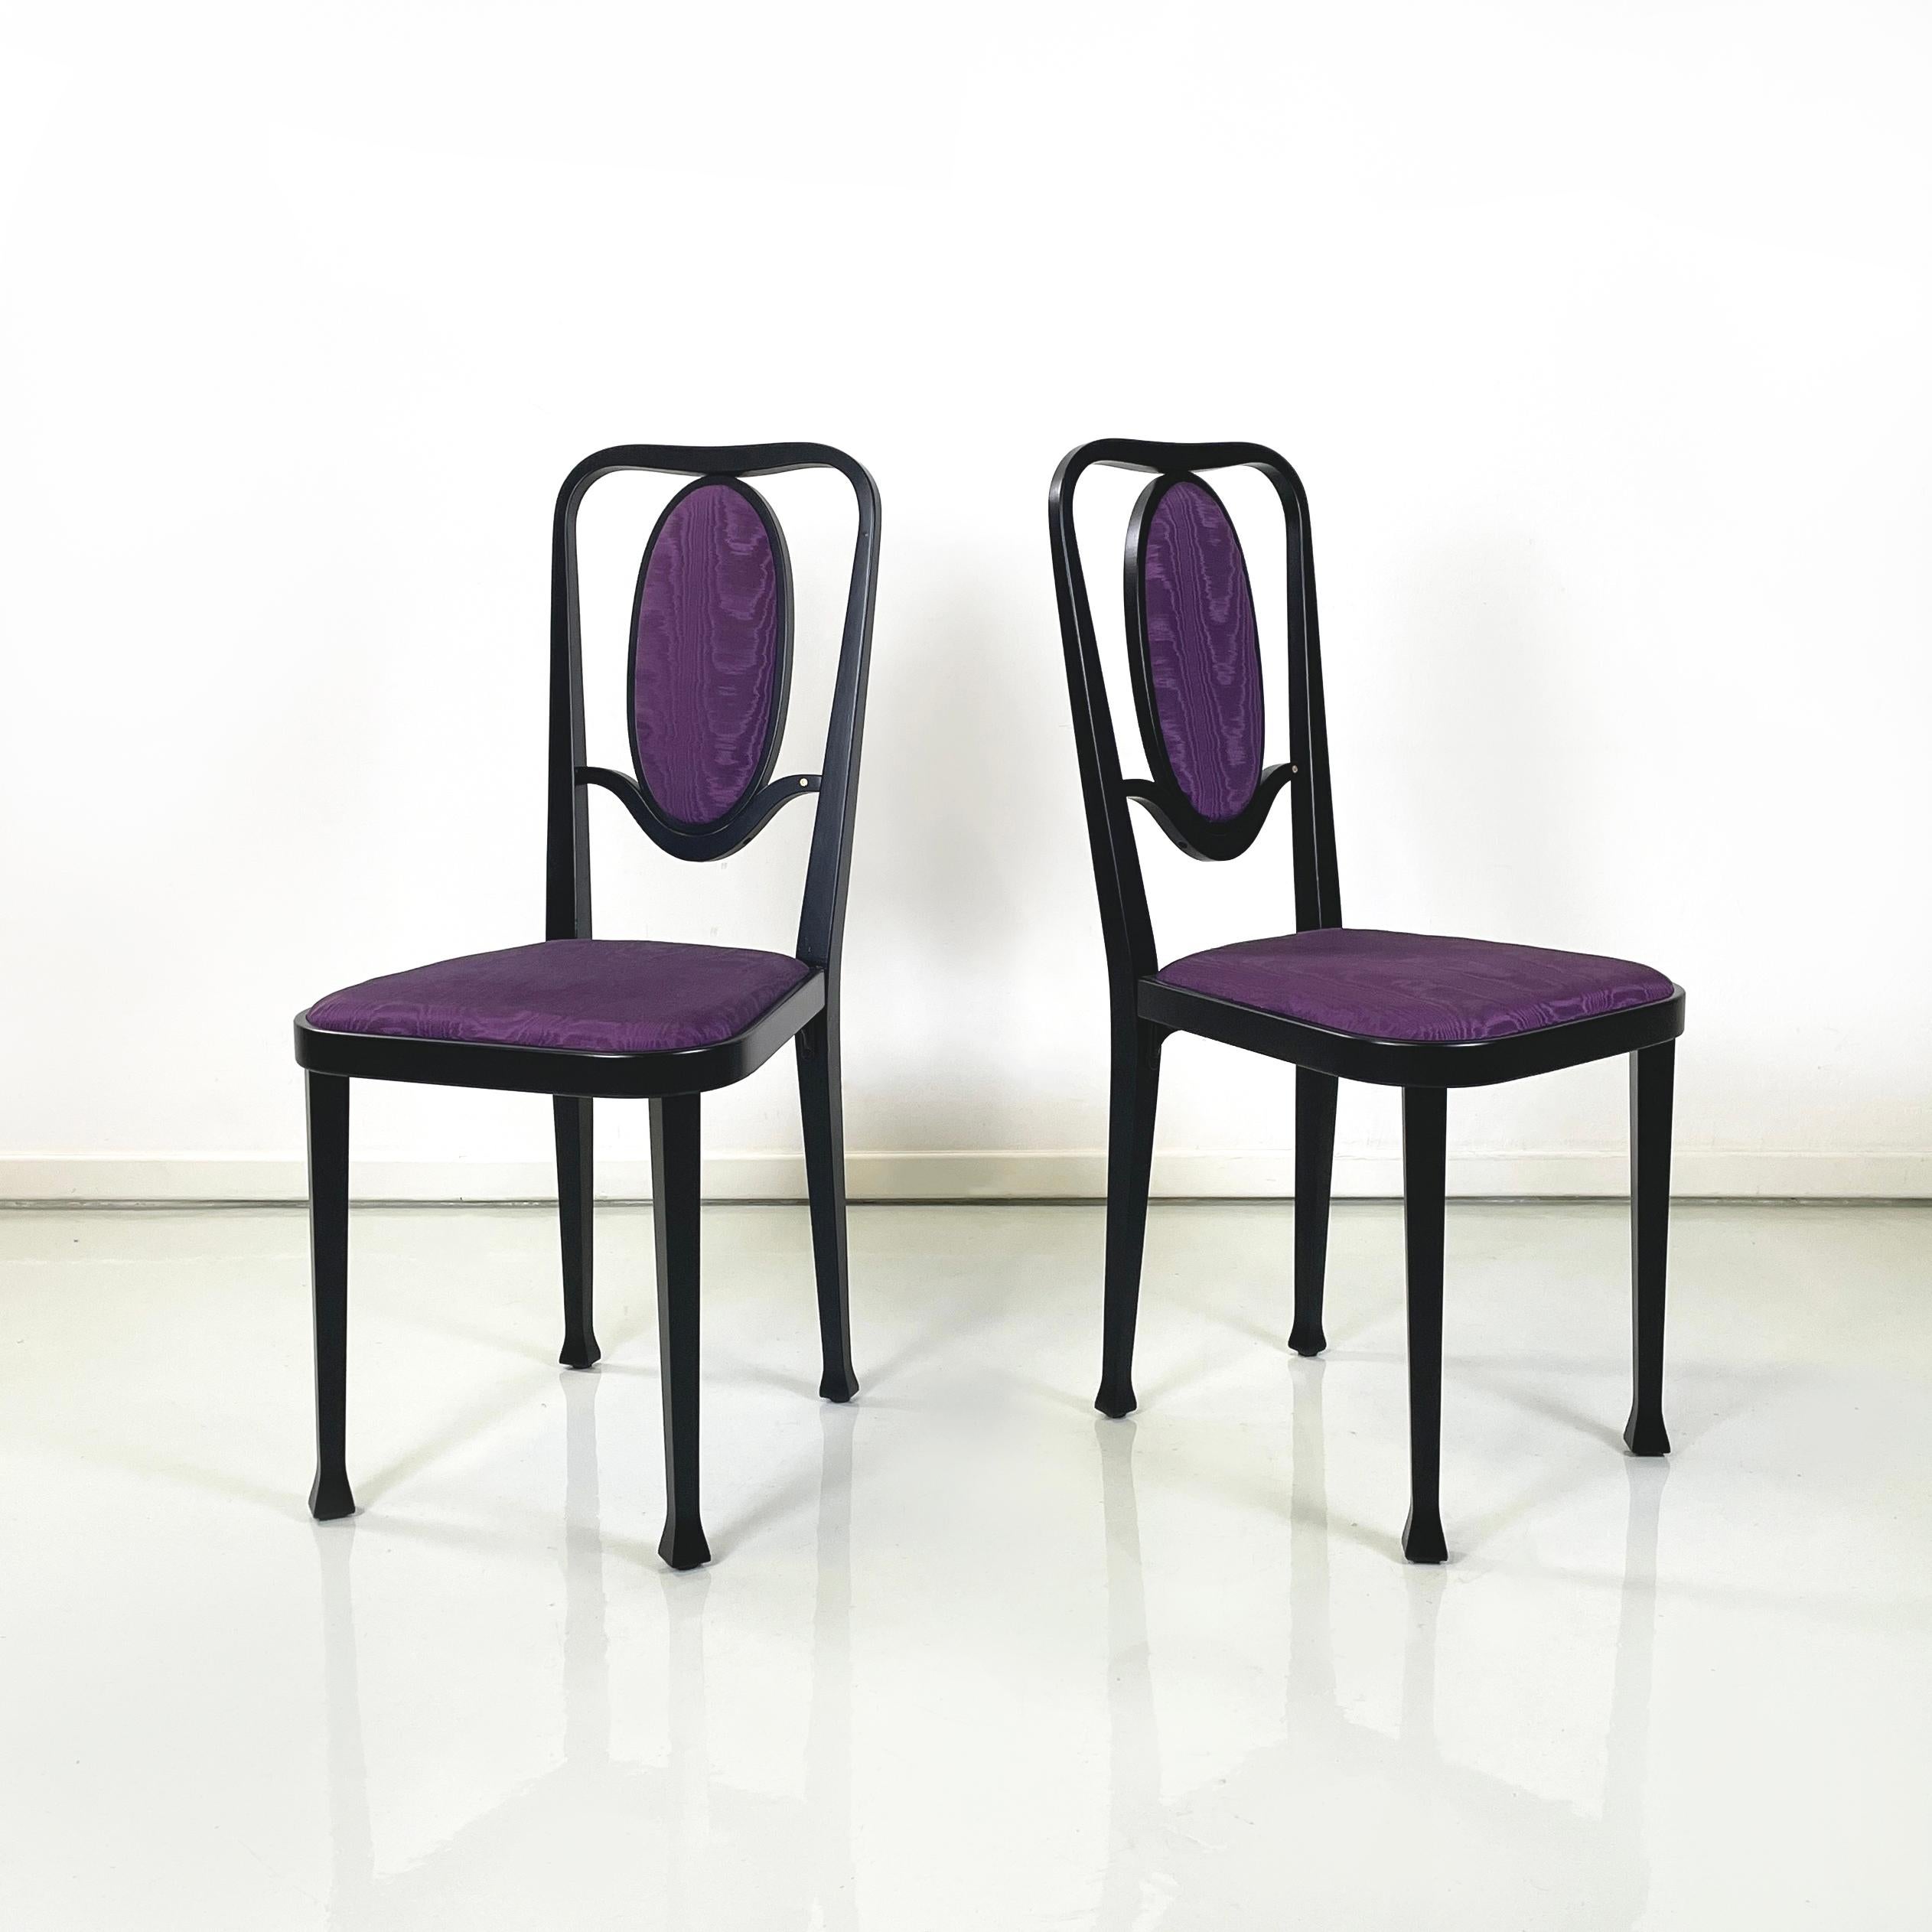 Set of 3 chairs mod. 414 with square seat and oval backrest, padded and covered in bright purple silk fabric. The structure is entirely made of black lacquered wood, with matt finish. The leg of the armchair has a square section with cantilevered